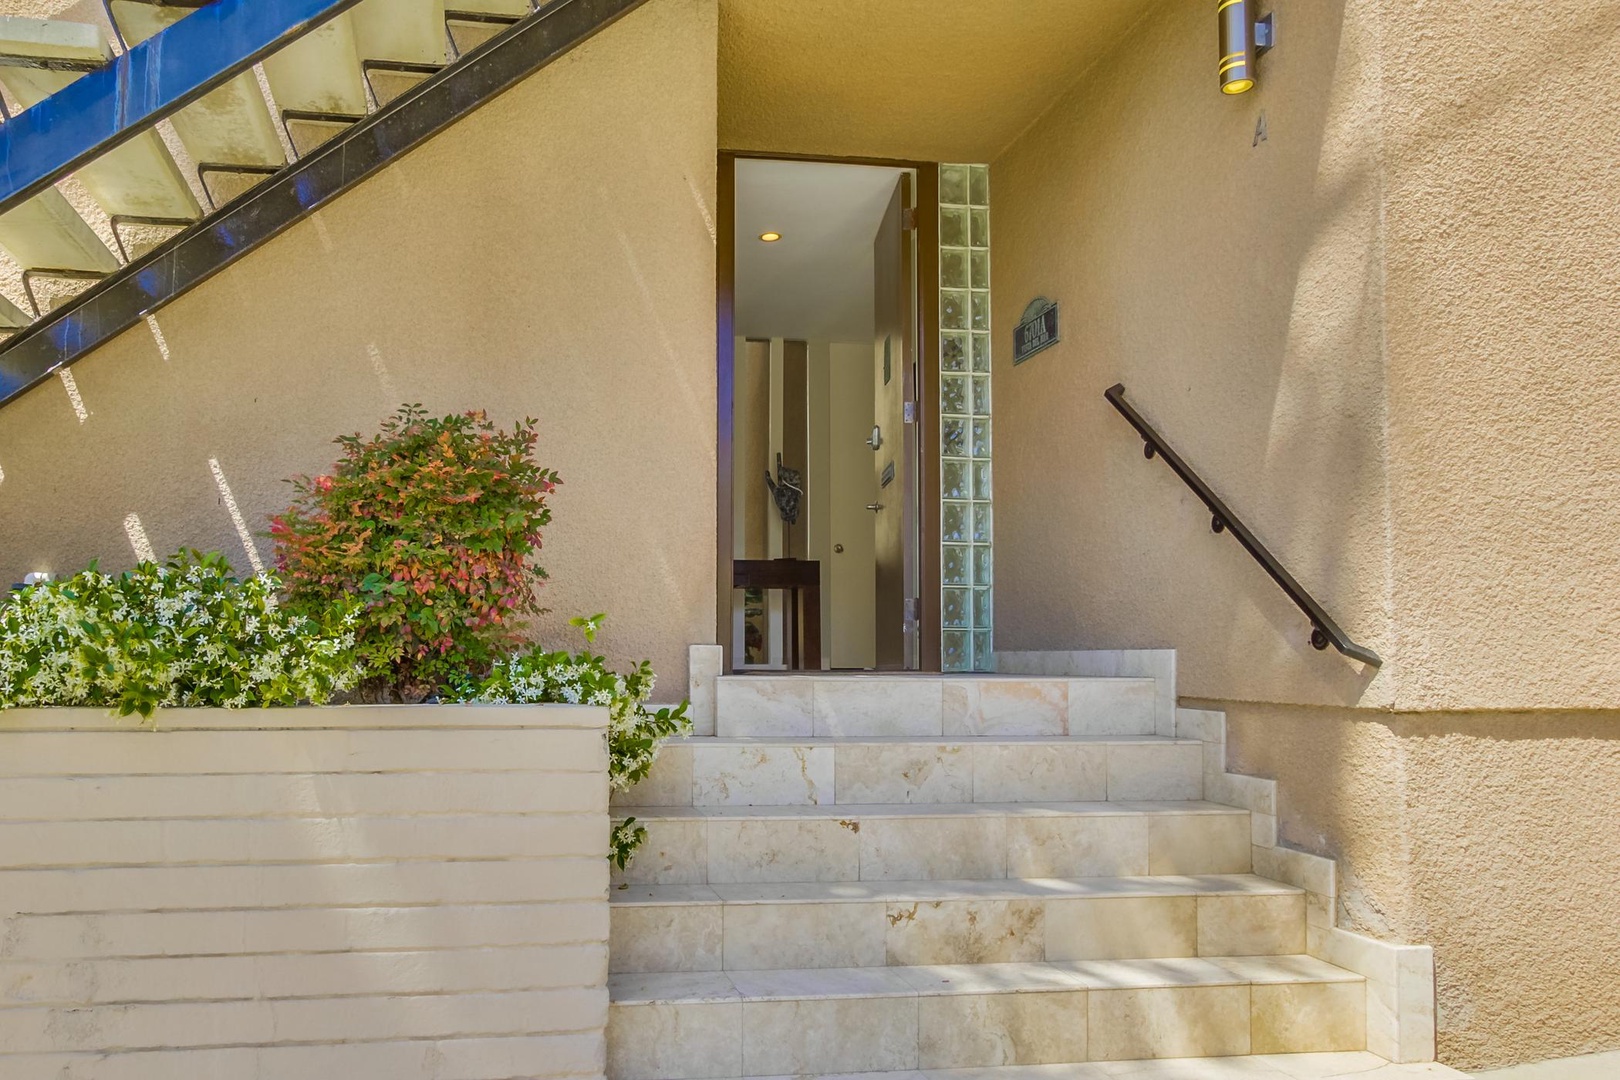 Stairs leading to property entrance